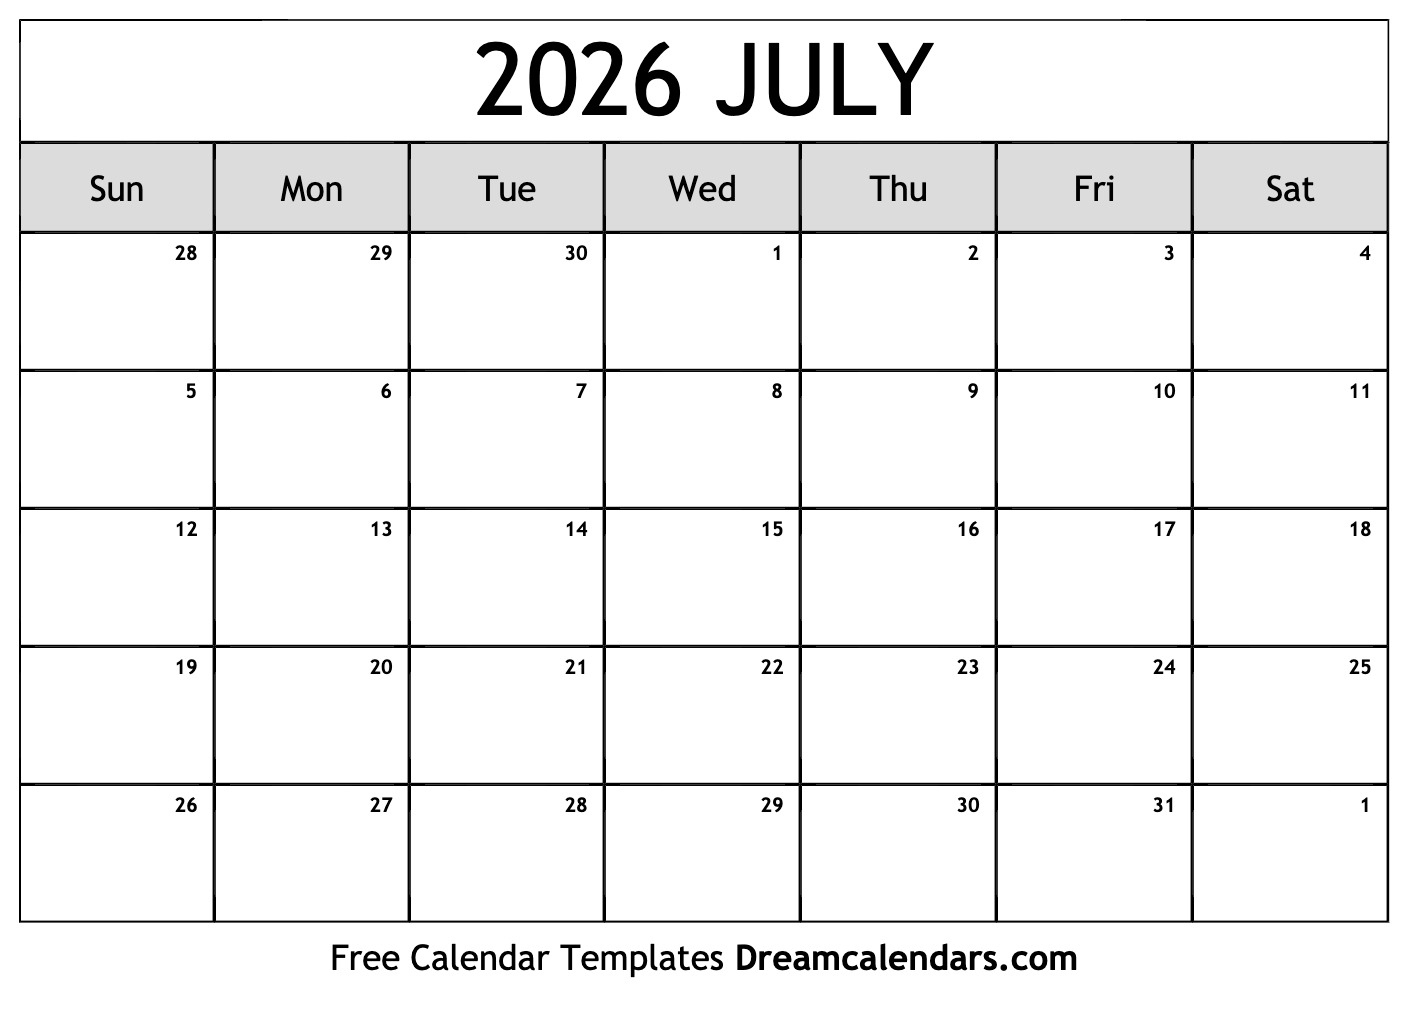 July 2026 Calendar - Free Printable With Holidays And Observances | Calendar For July 2026